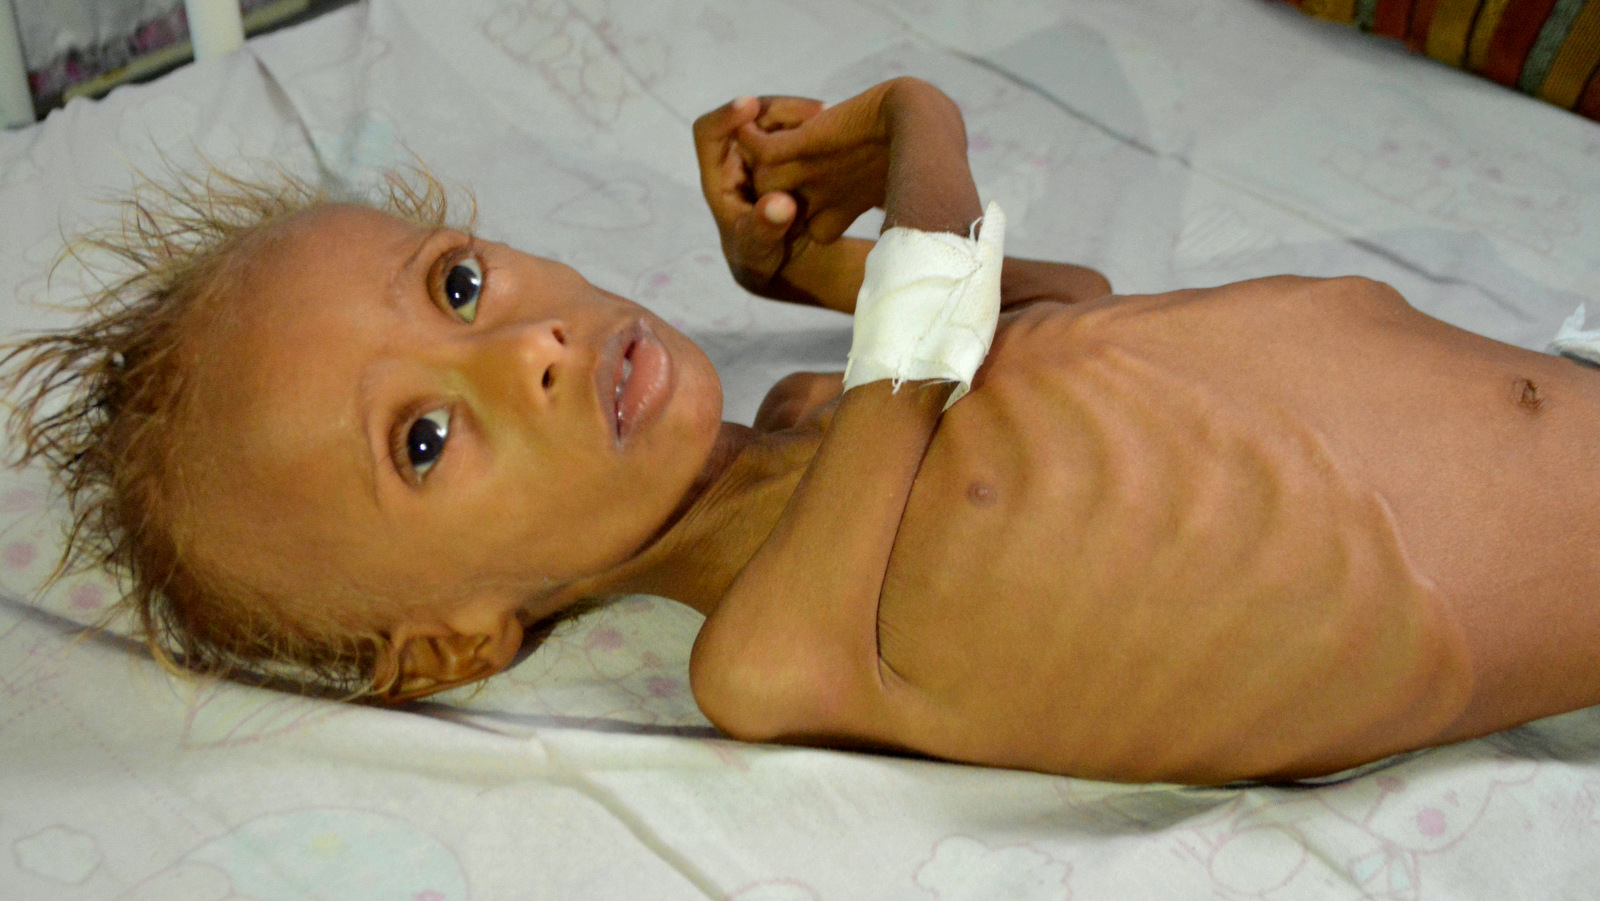 Salem, 5, who suffers from malnutrition, lies on a bed at a hospital in the port city of Hodeidah, southwest of Sanaa, Yemen. Even before the war, Hodeidah was one of the poorest cities in Yemen, the Arab world’s most impoverished nation. Now, the destruction of the port city’s fishing boats and infrastructure by Saudi-led airstrikes means the U.N. estimates 100,000 children in the province are at risk of severe malnutrition. (AP Photo)